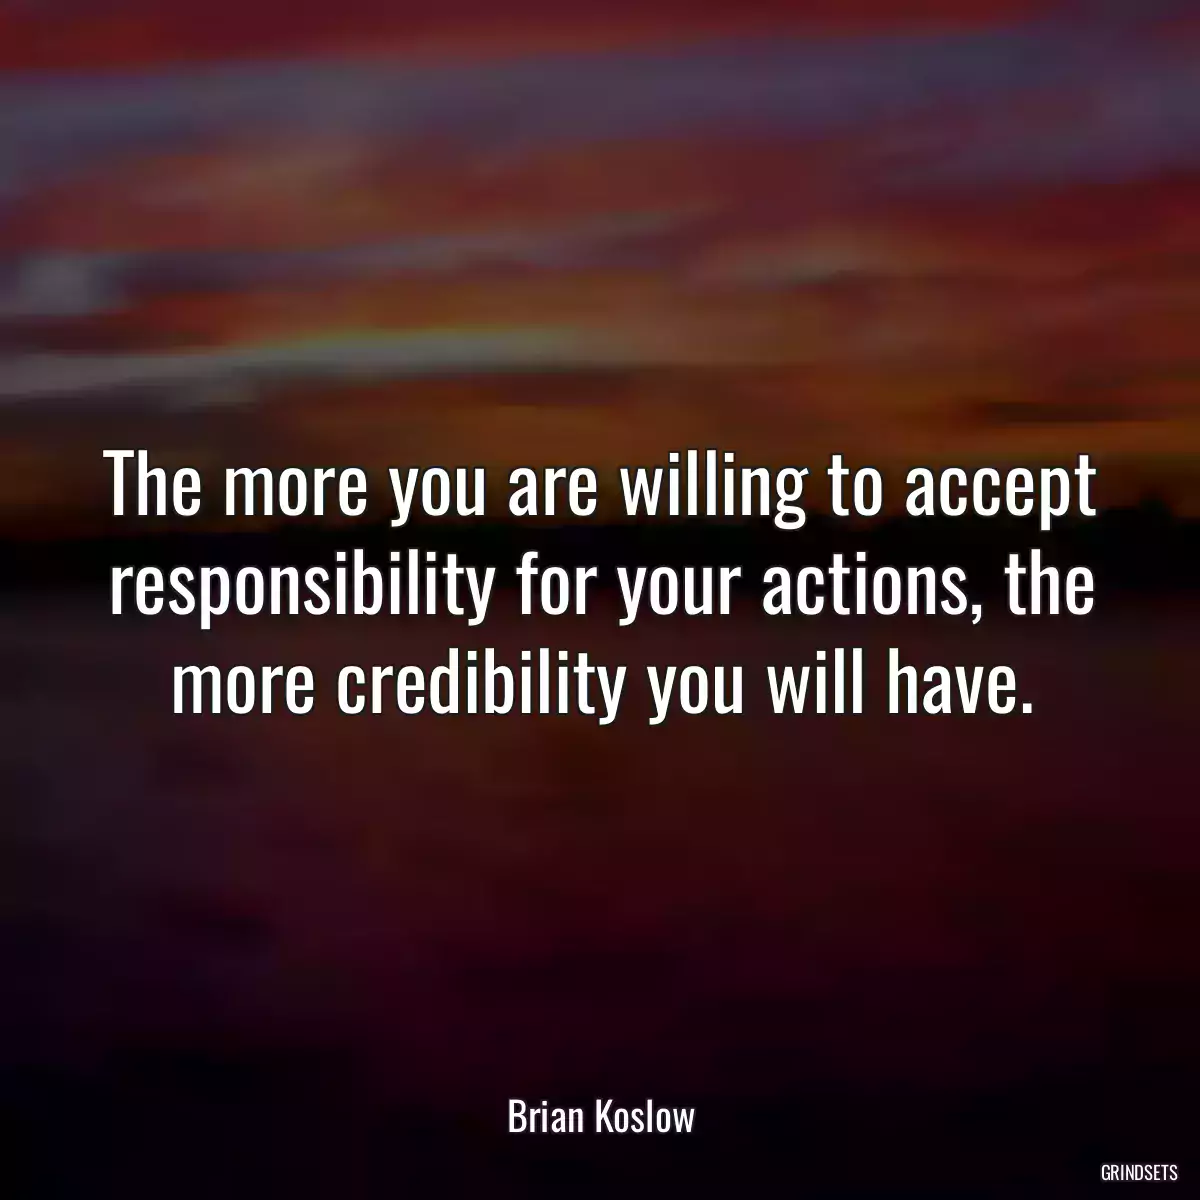 The more you are willing to accept responsibility for your actions, the more credibility you will have.